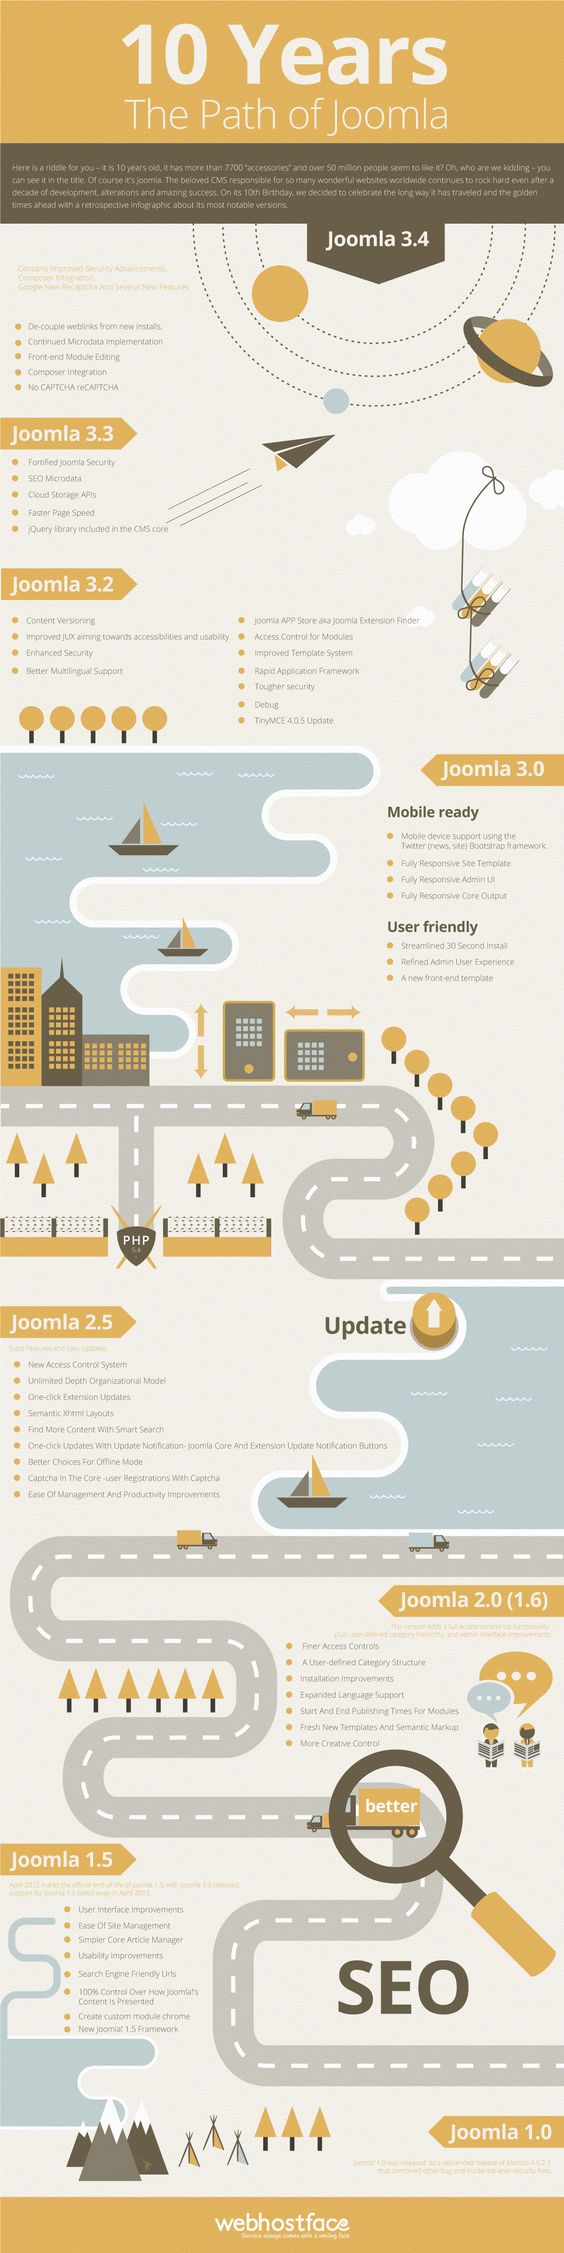 Here is a riddle for you – it is 10 years old, it has more than 7700 “accessories” and over 50 million people seem to like it? Of course it's Joomla!  On its 10th Birthday, we decided to celebrate the long way it has traveled and the golden times ahead with a retrospective infographic about its most notable versions.